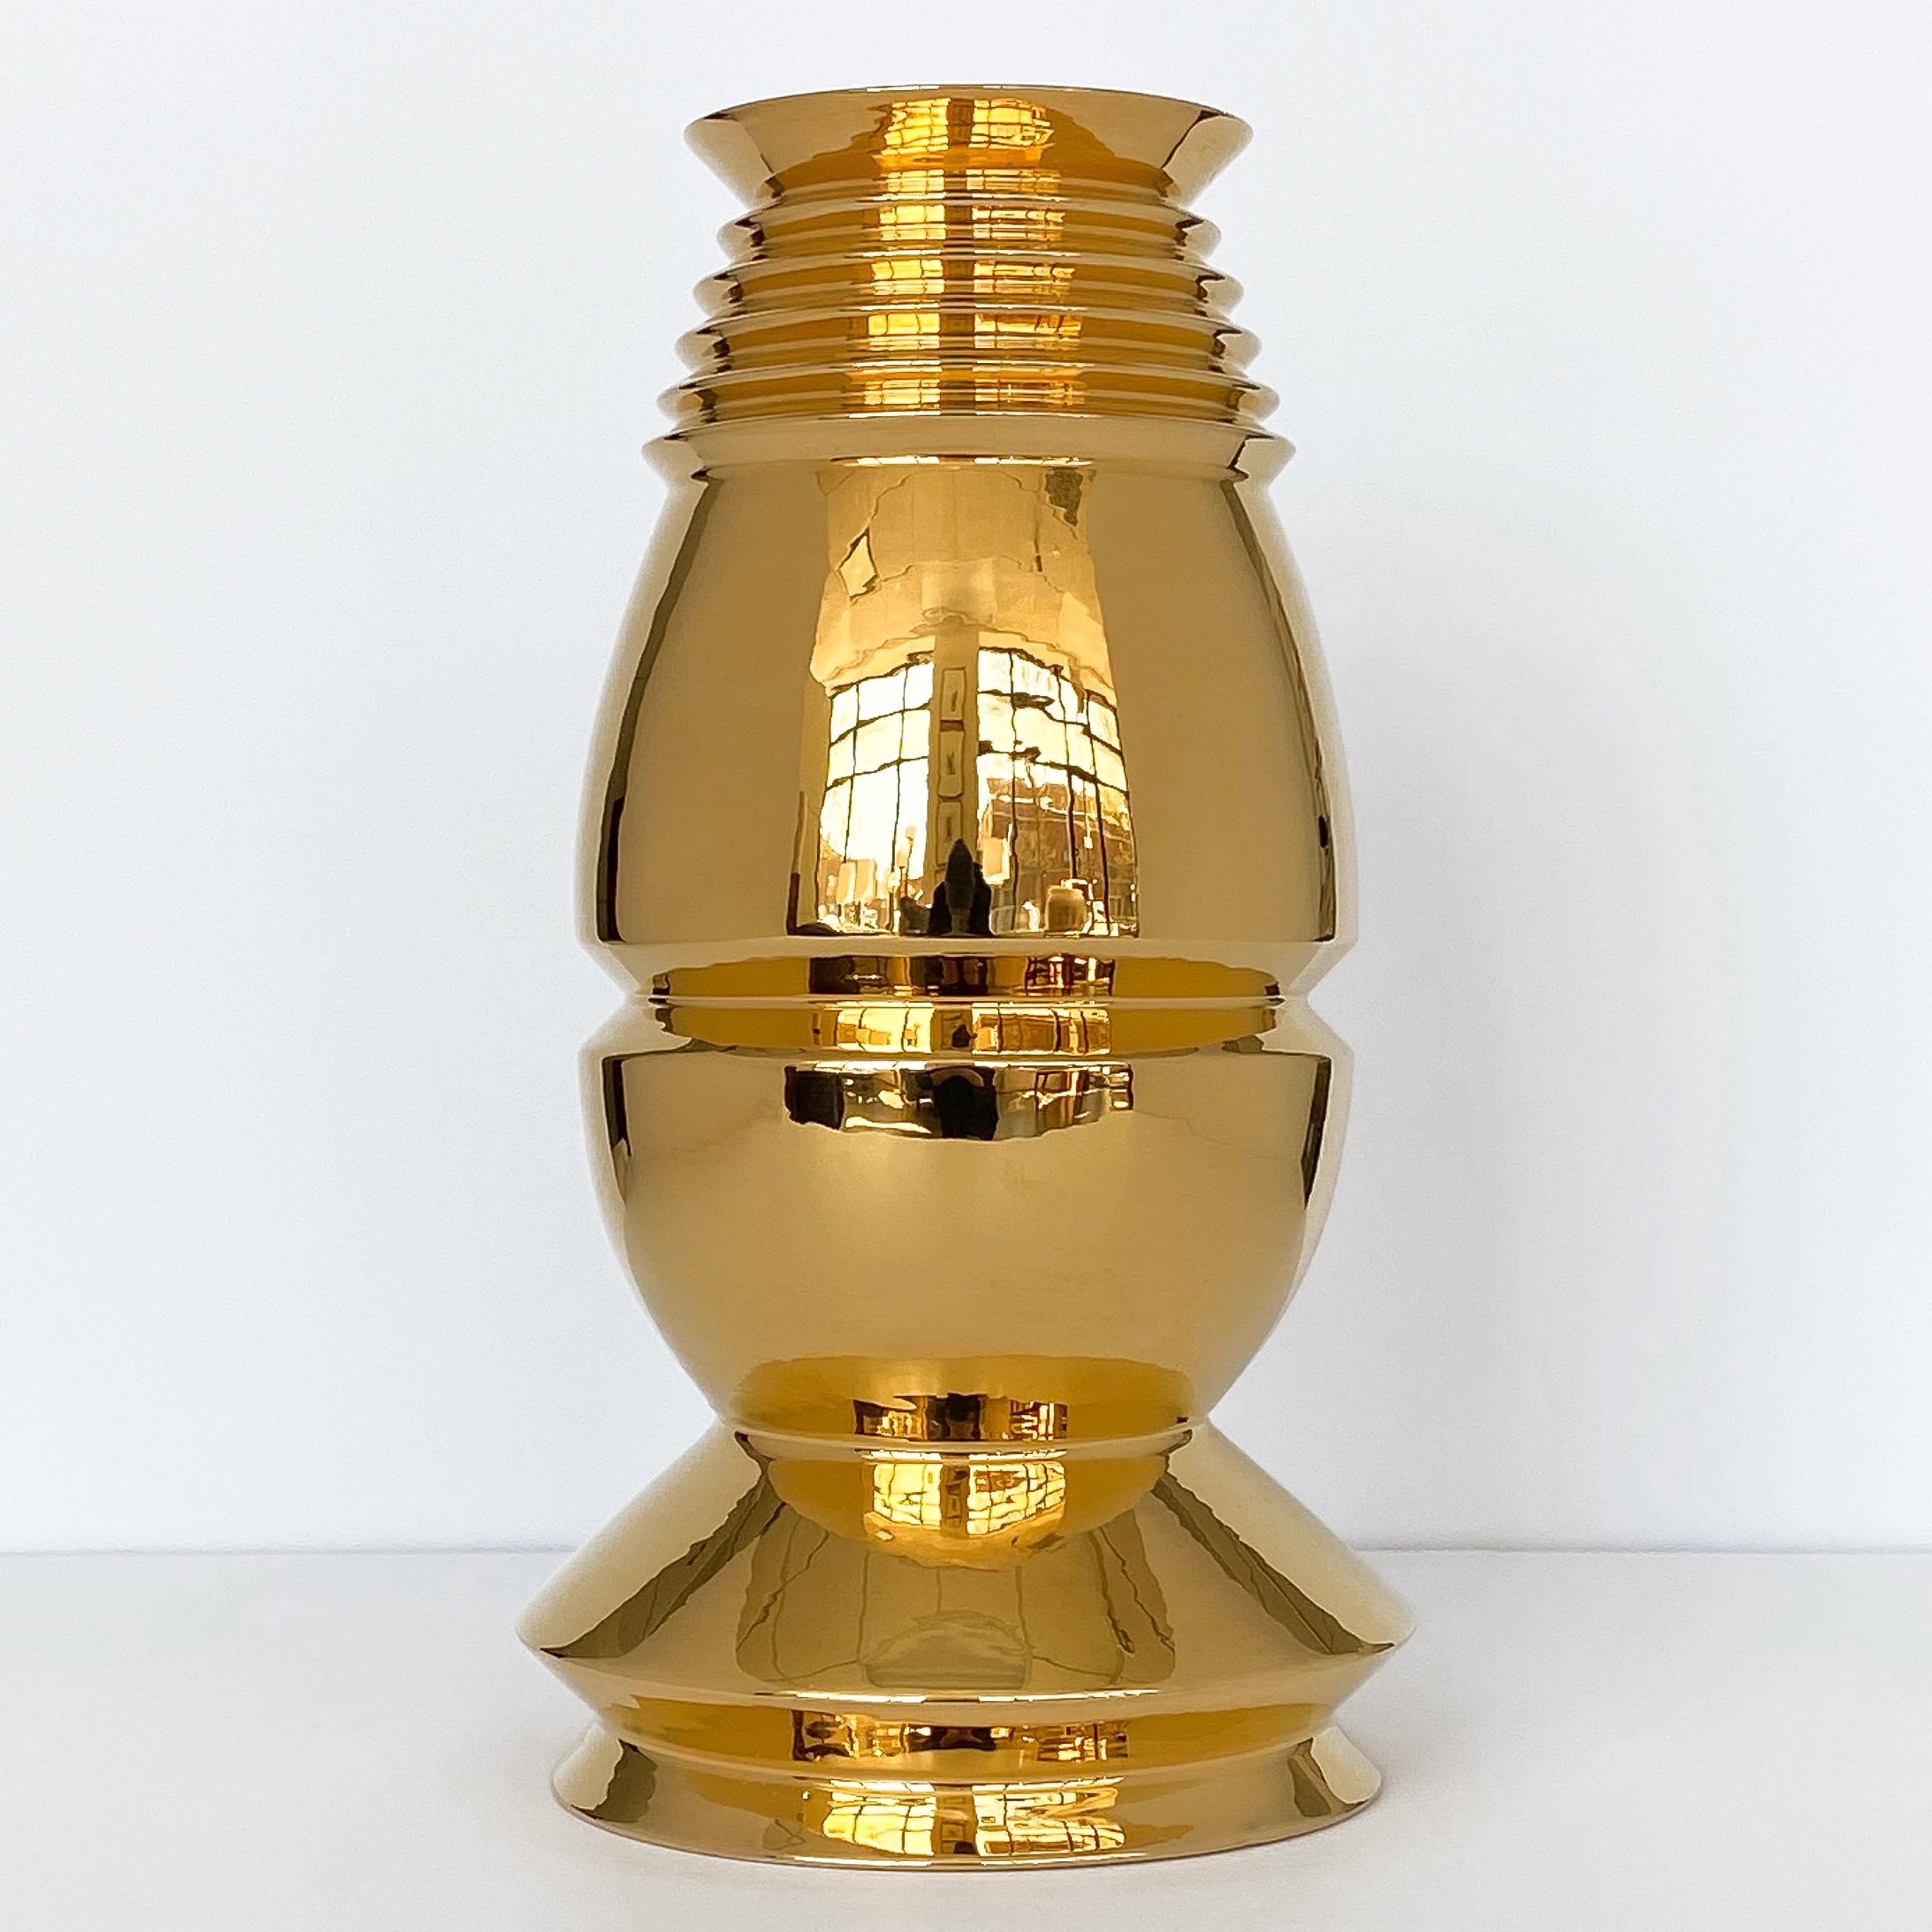 Metallic gold glazed model BKK ceramic vase from the collection Toky 1980 designed by Sergio Asti and produced by Superego Editions, circa 2006. Limited edition of 50 copies. Signed and numbered. This example is number 11 from the edition of 50.